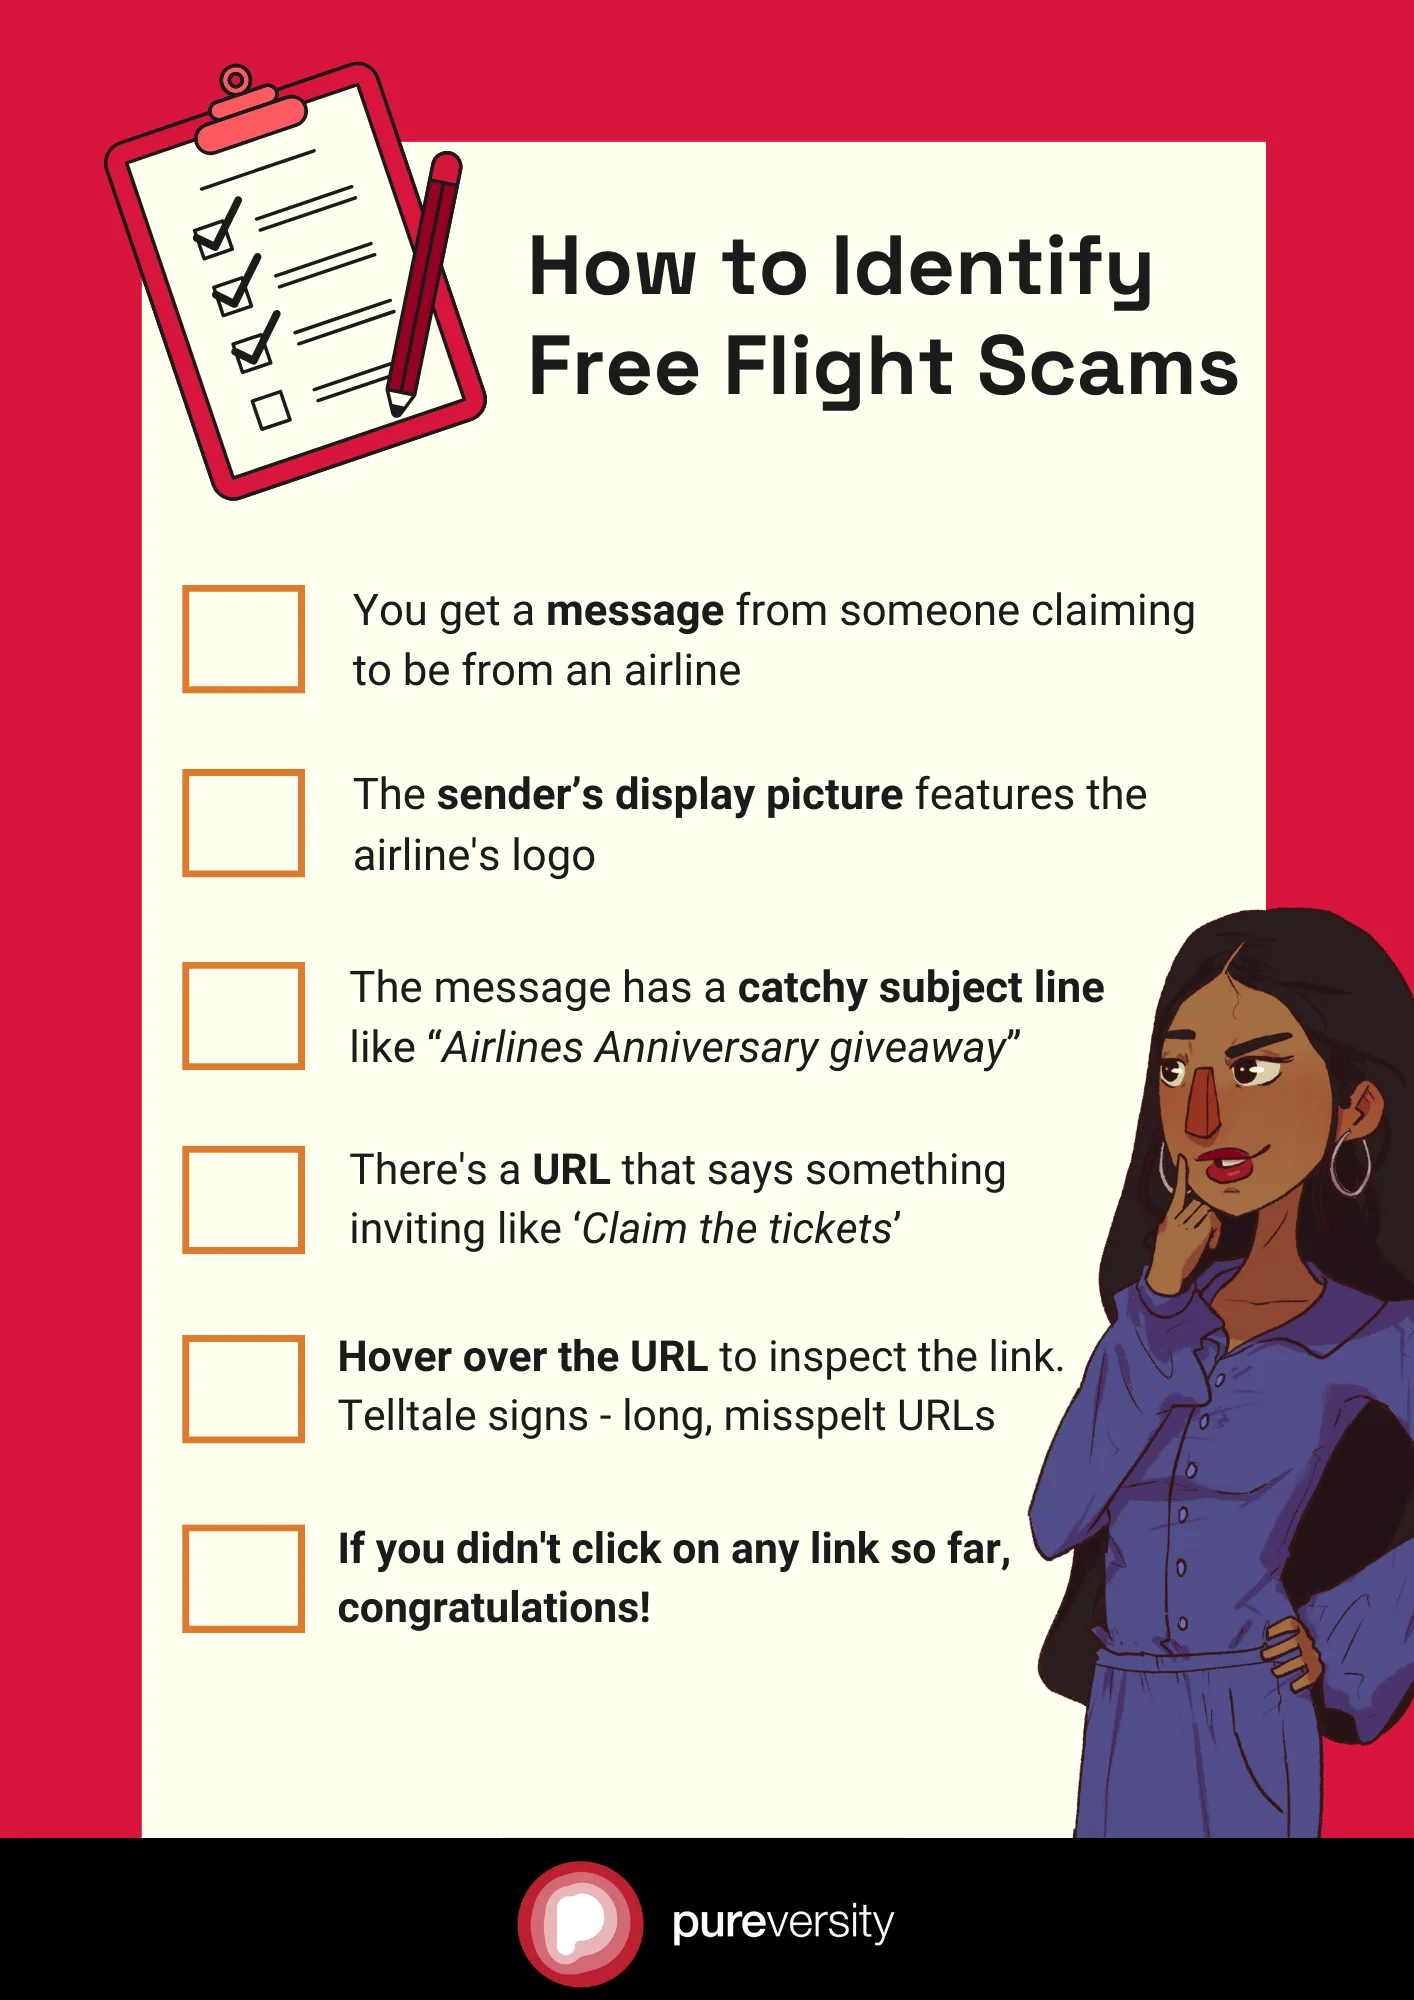 A list of things to do to avoid falling victim to a free flight scam on WhatsApp